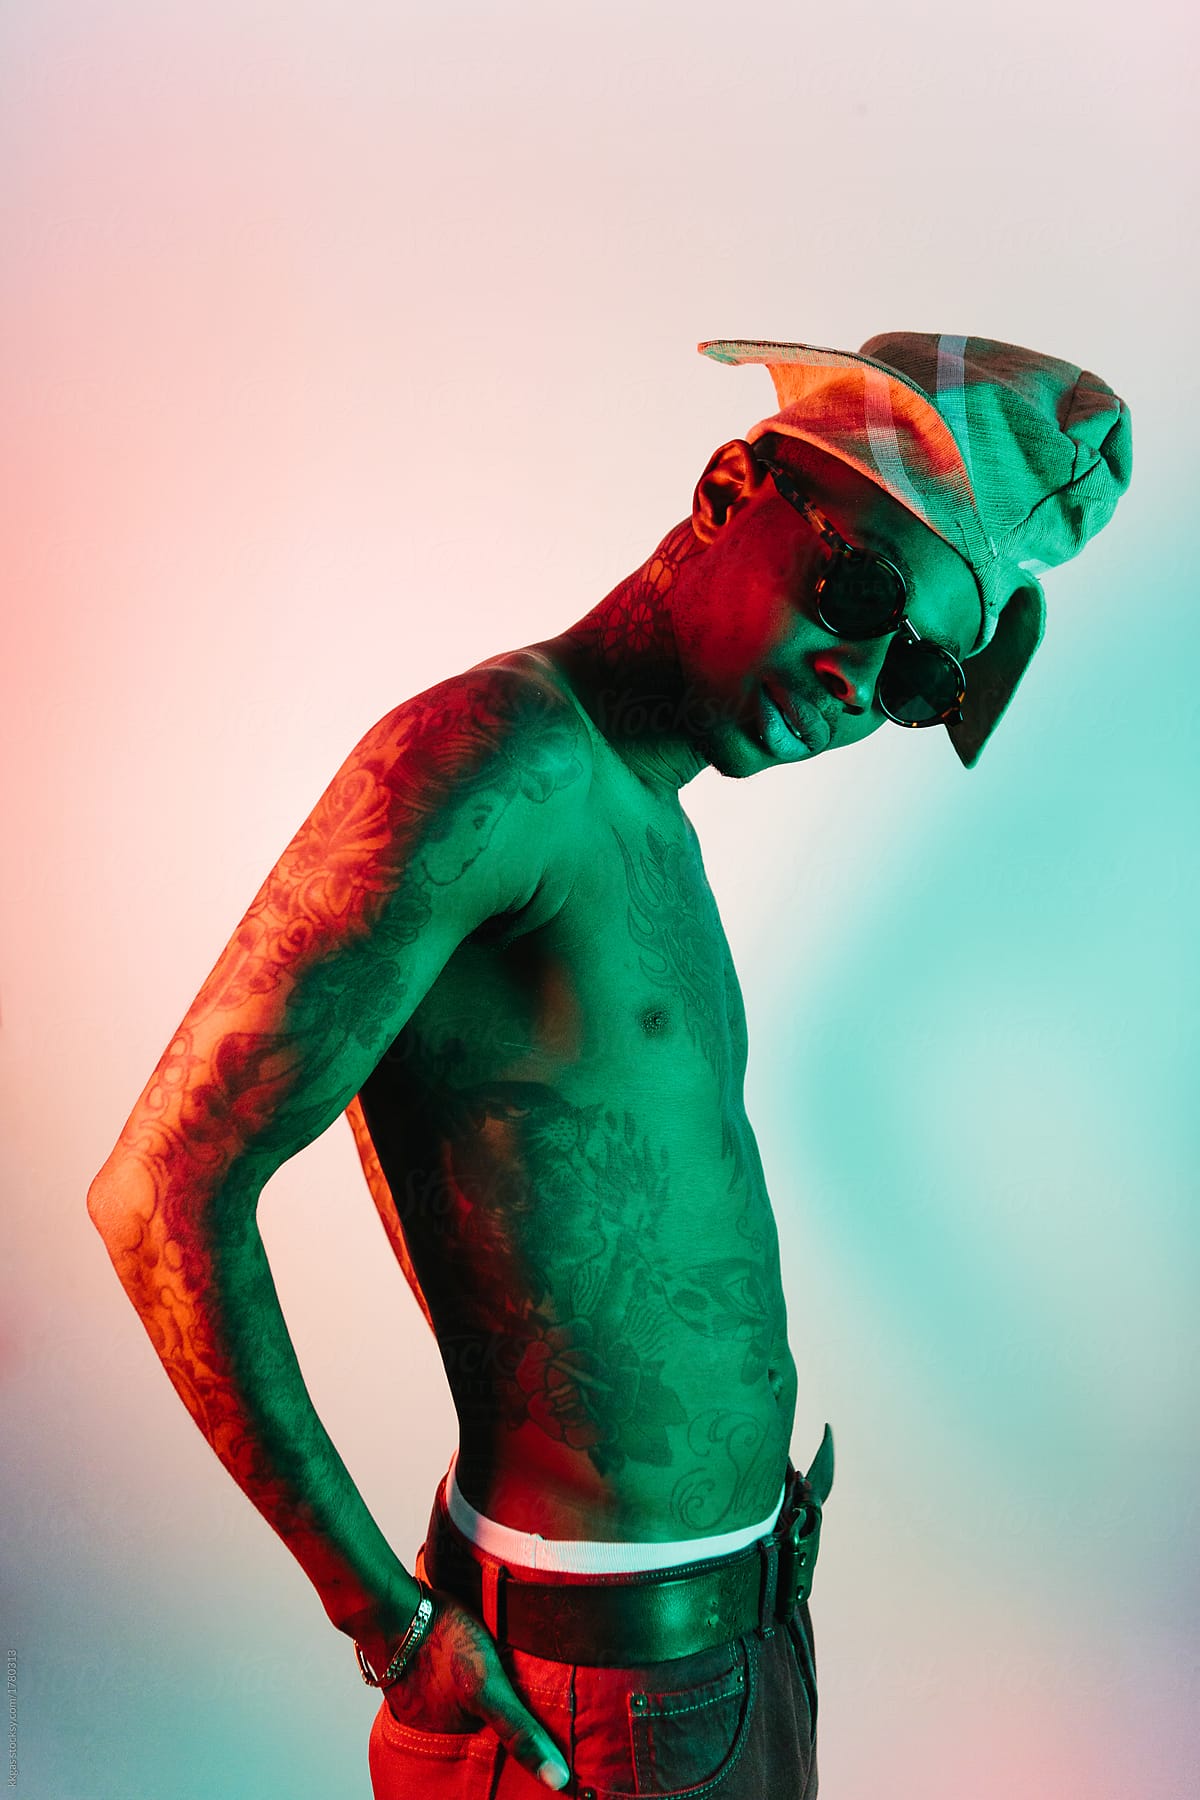 Bare chested heavily tattooed man wearing a Yoruba hat with orange and green lighting